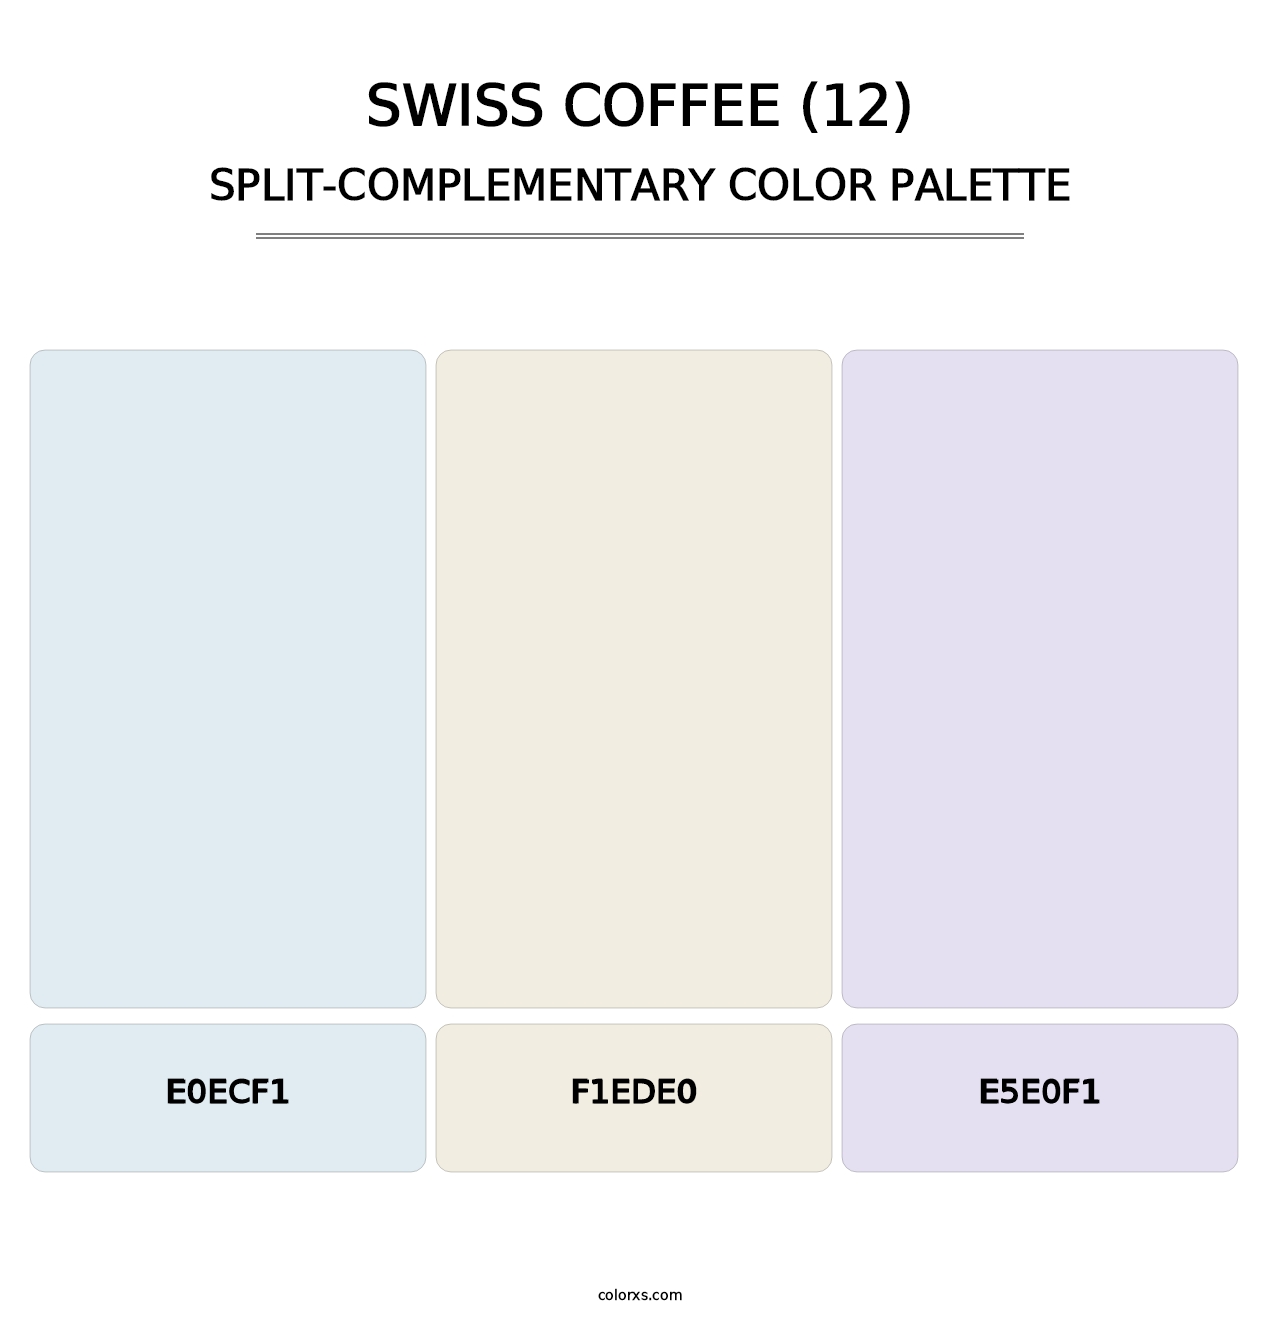 Swiss Coffee (12) - Split-Complementary Color Palette